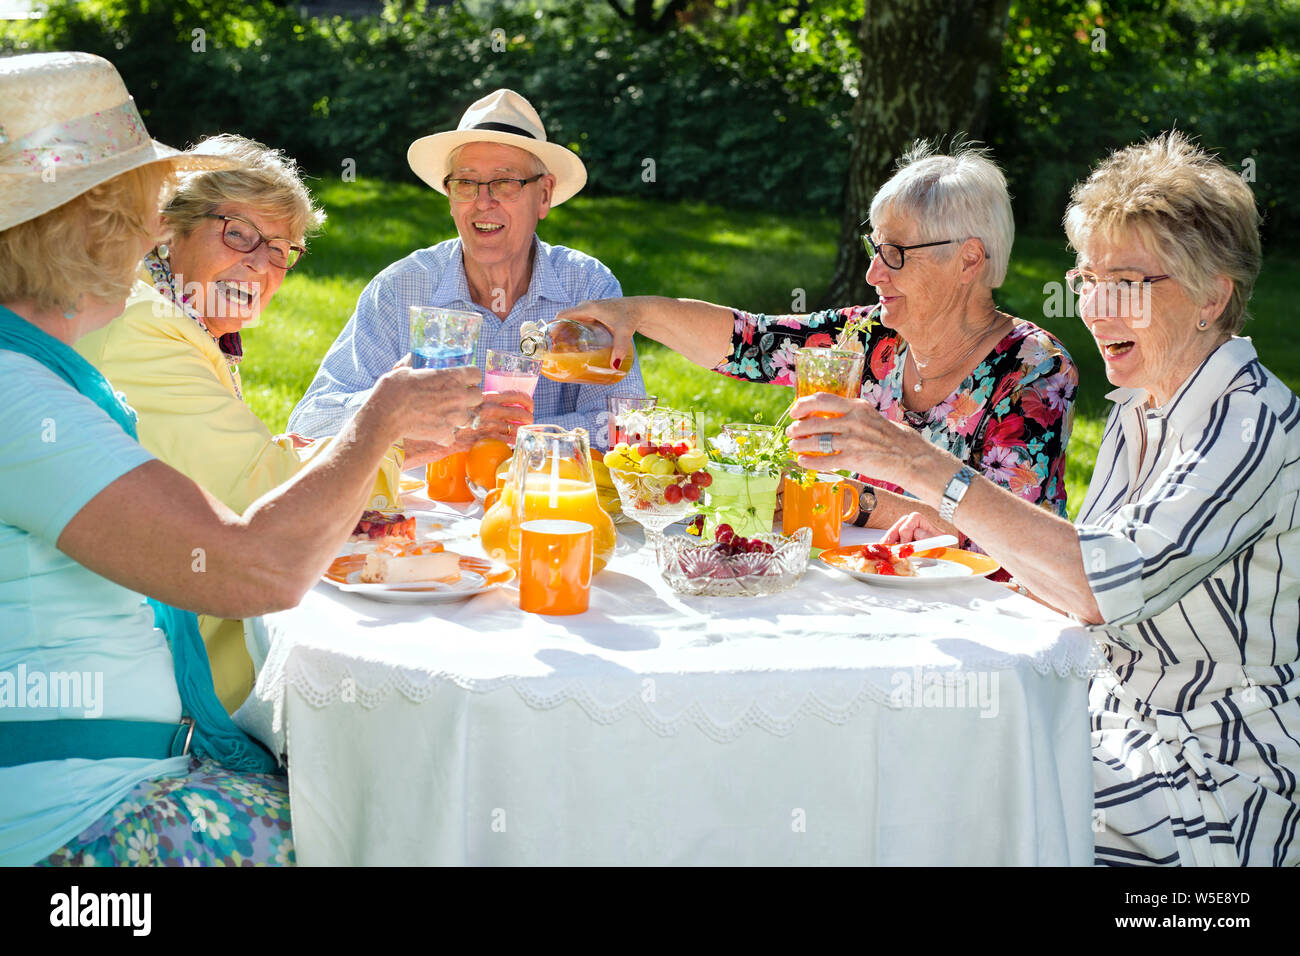 Happy elderly people sitting around the table picnicking. Group of seniors eating fruit cake and drinking orange juice, one woman is serving juice. Stock Photo